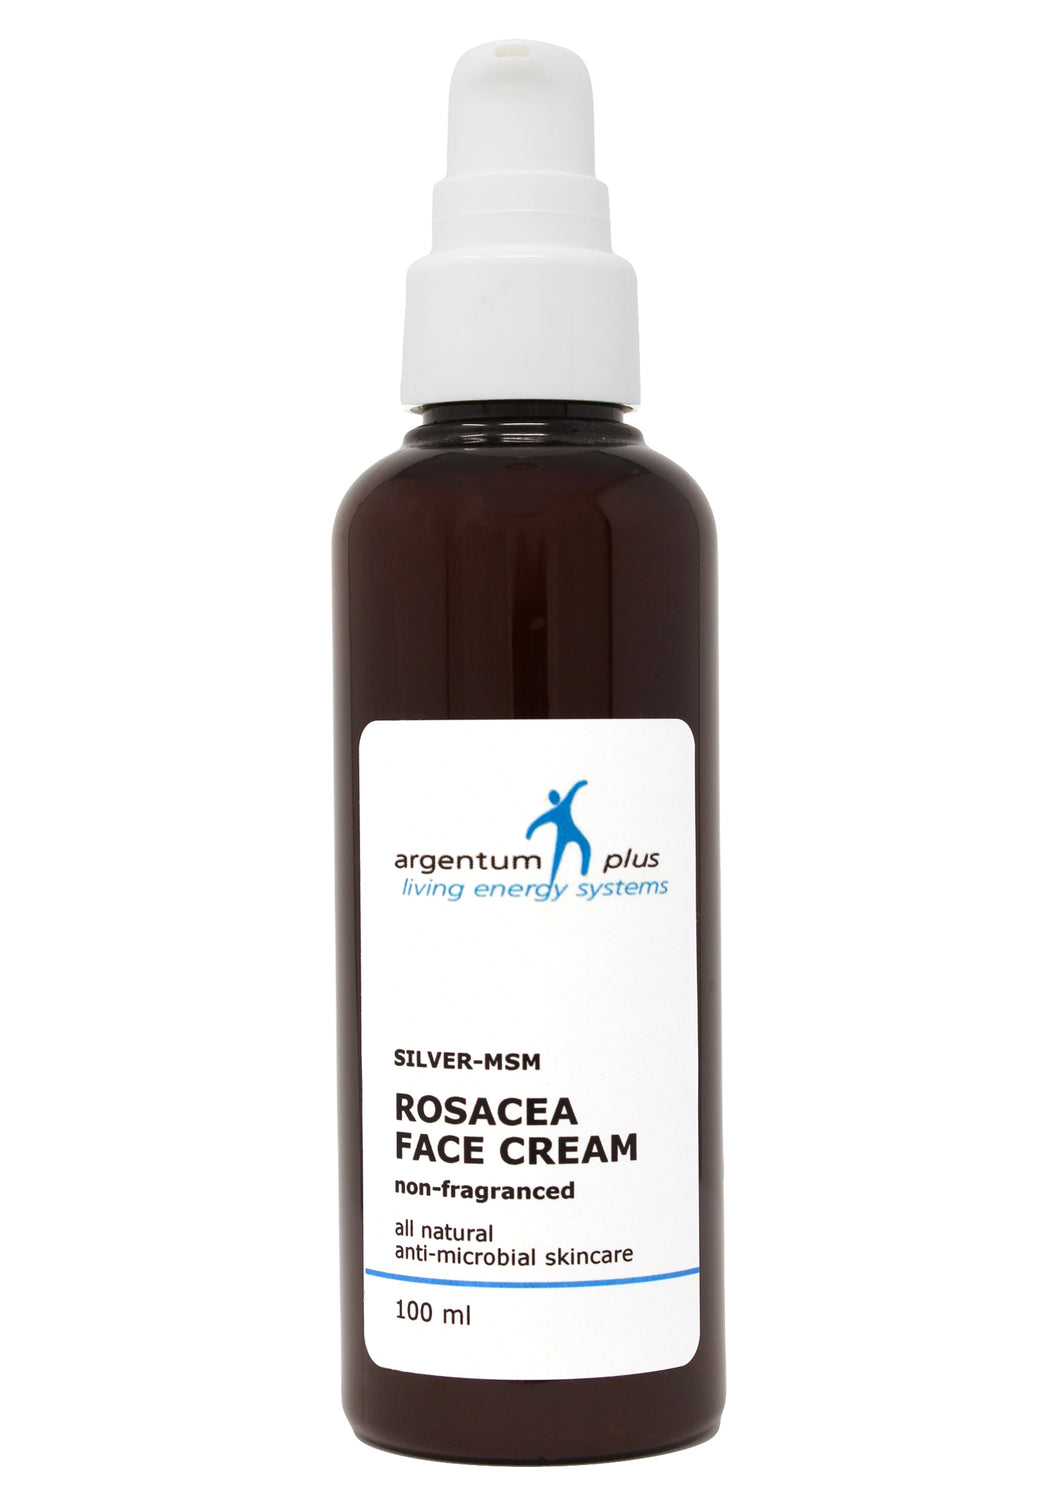 Silver-MSM Rosacea Face Cream (2 size options)